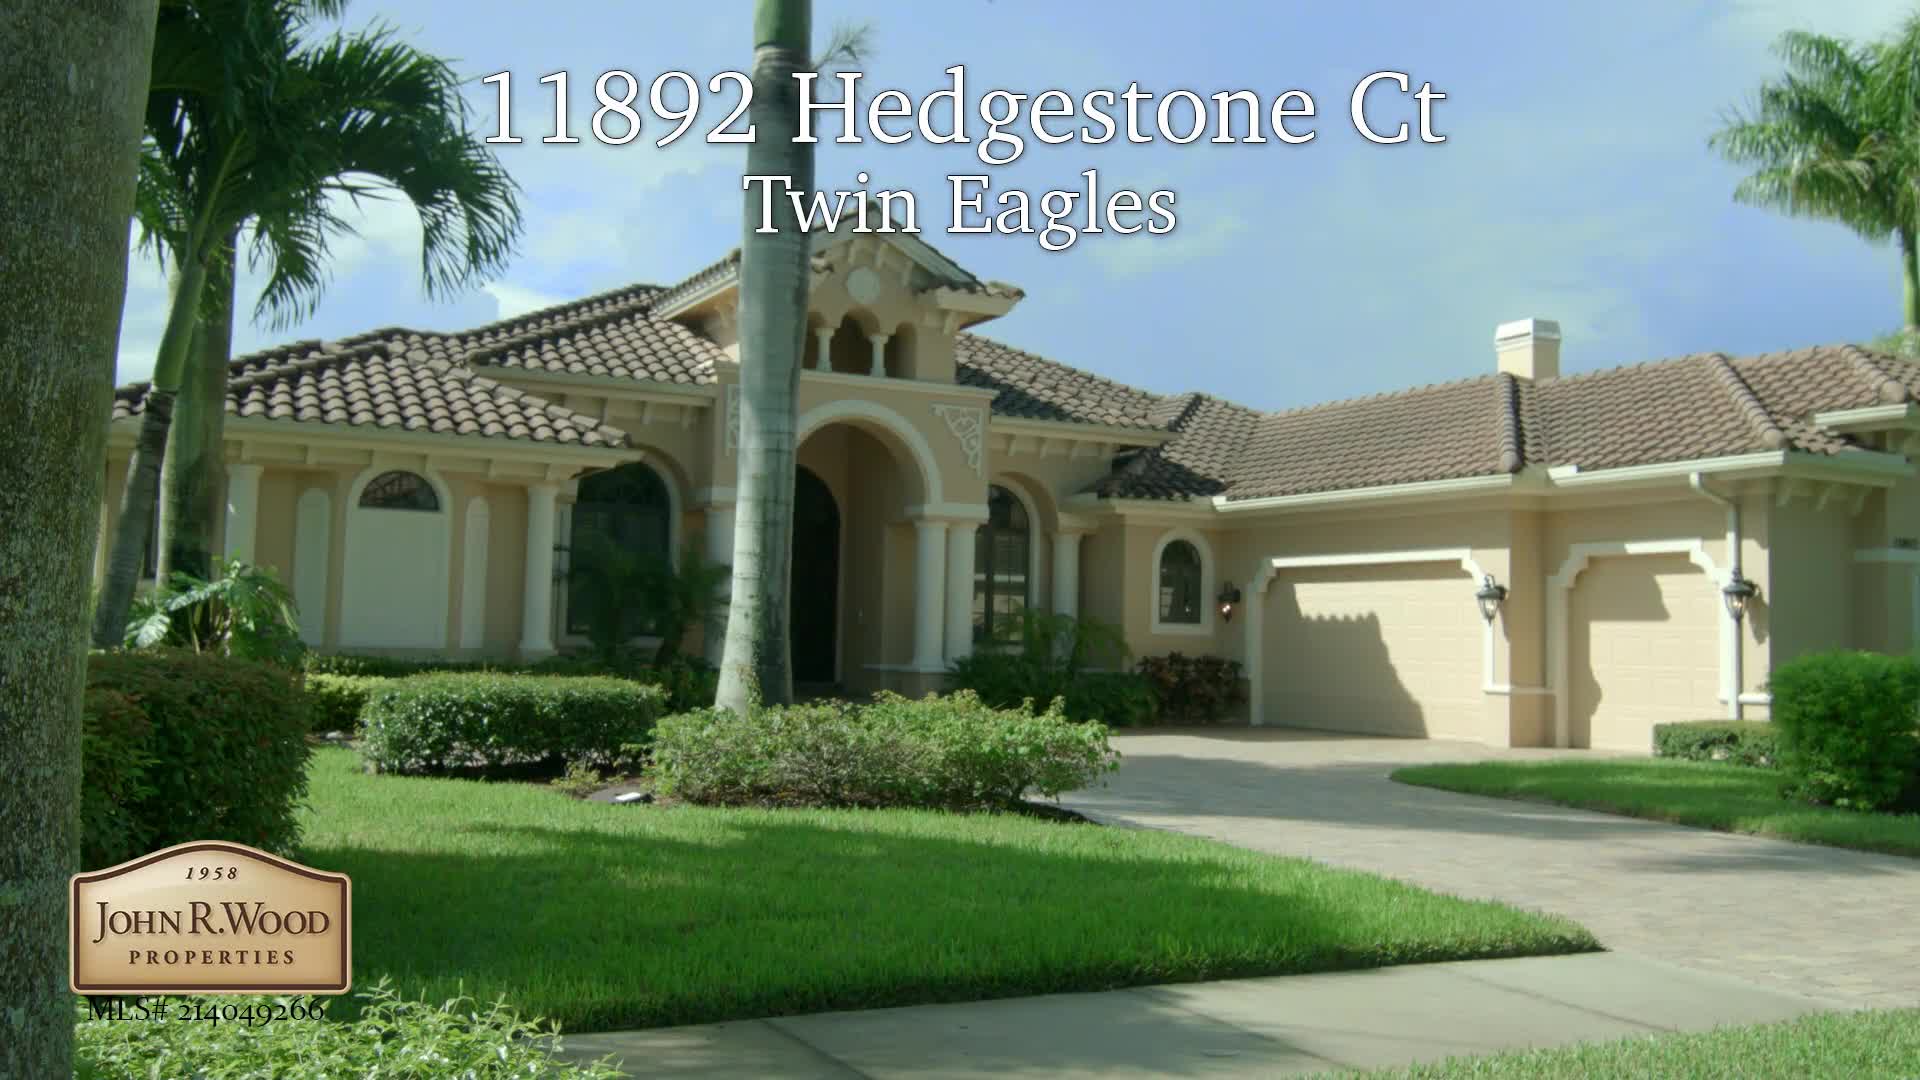 New House From Company Twin Eagles